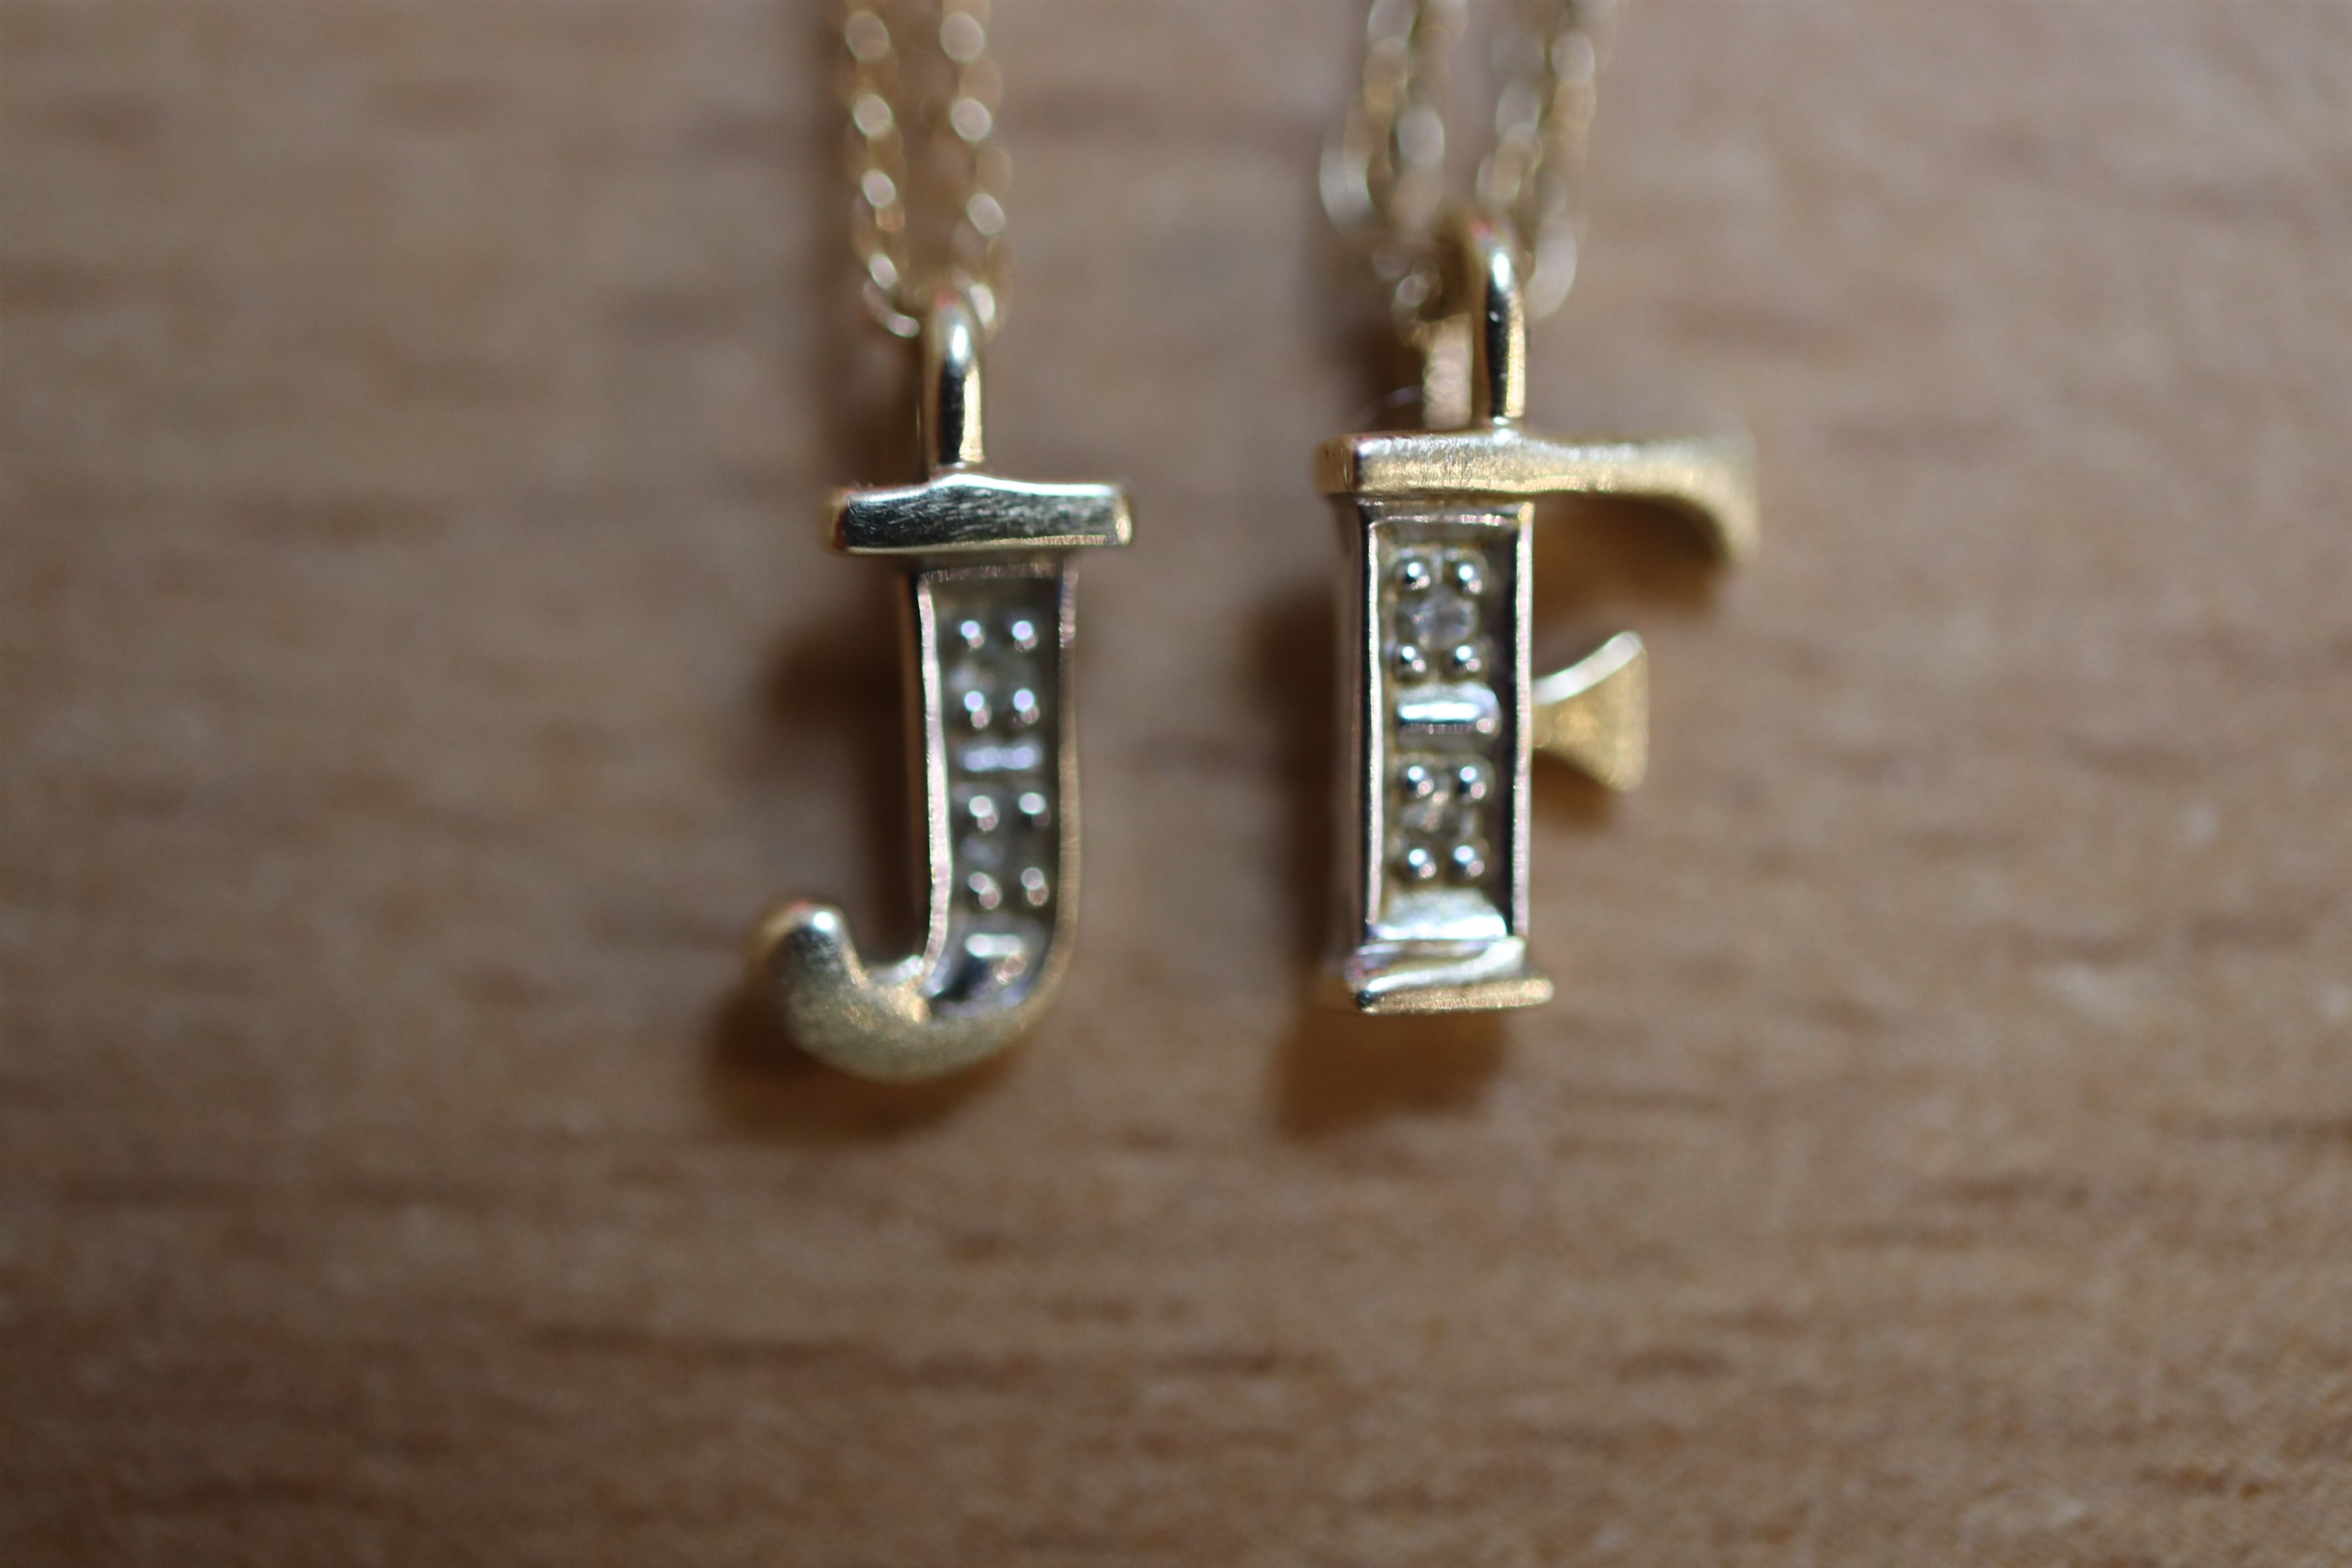 Two late 20th Century 14 ct yellow metal initial pendant necklaces, comprising a 'J' and an 'F' both